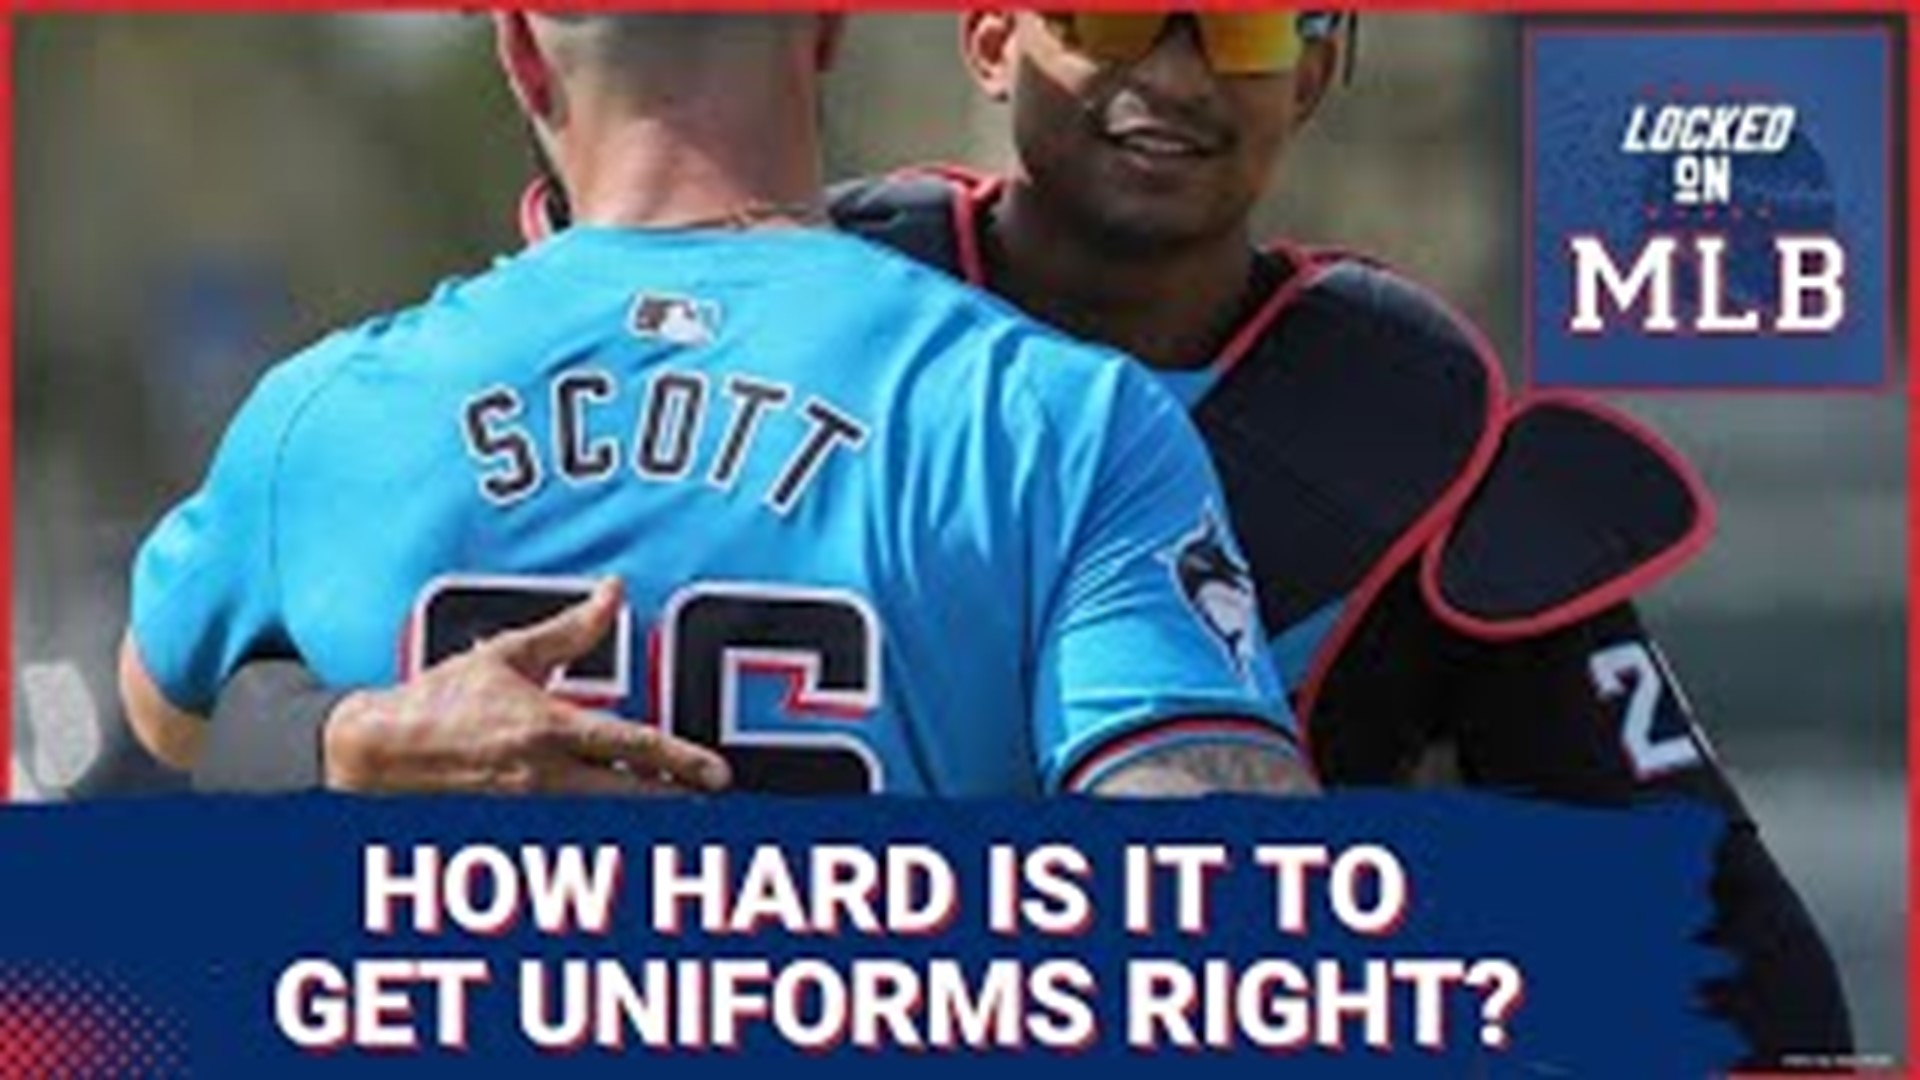 Cheaplooking MLB jerseys create controversy in baseball circles